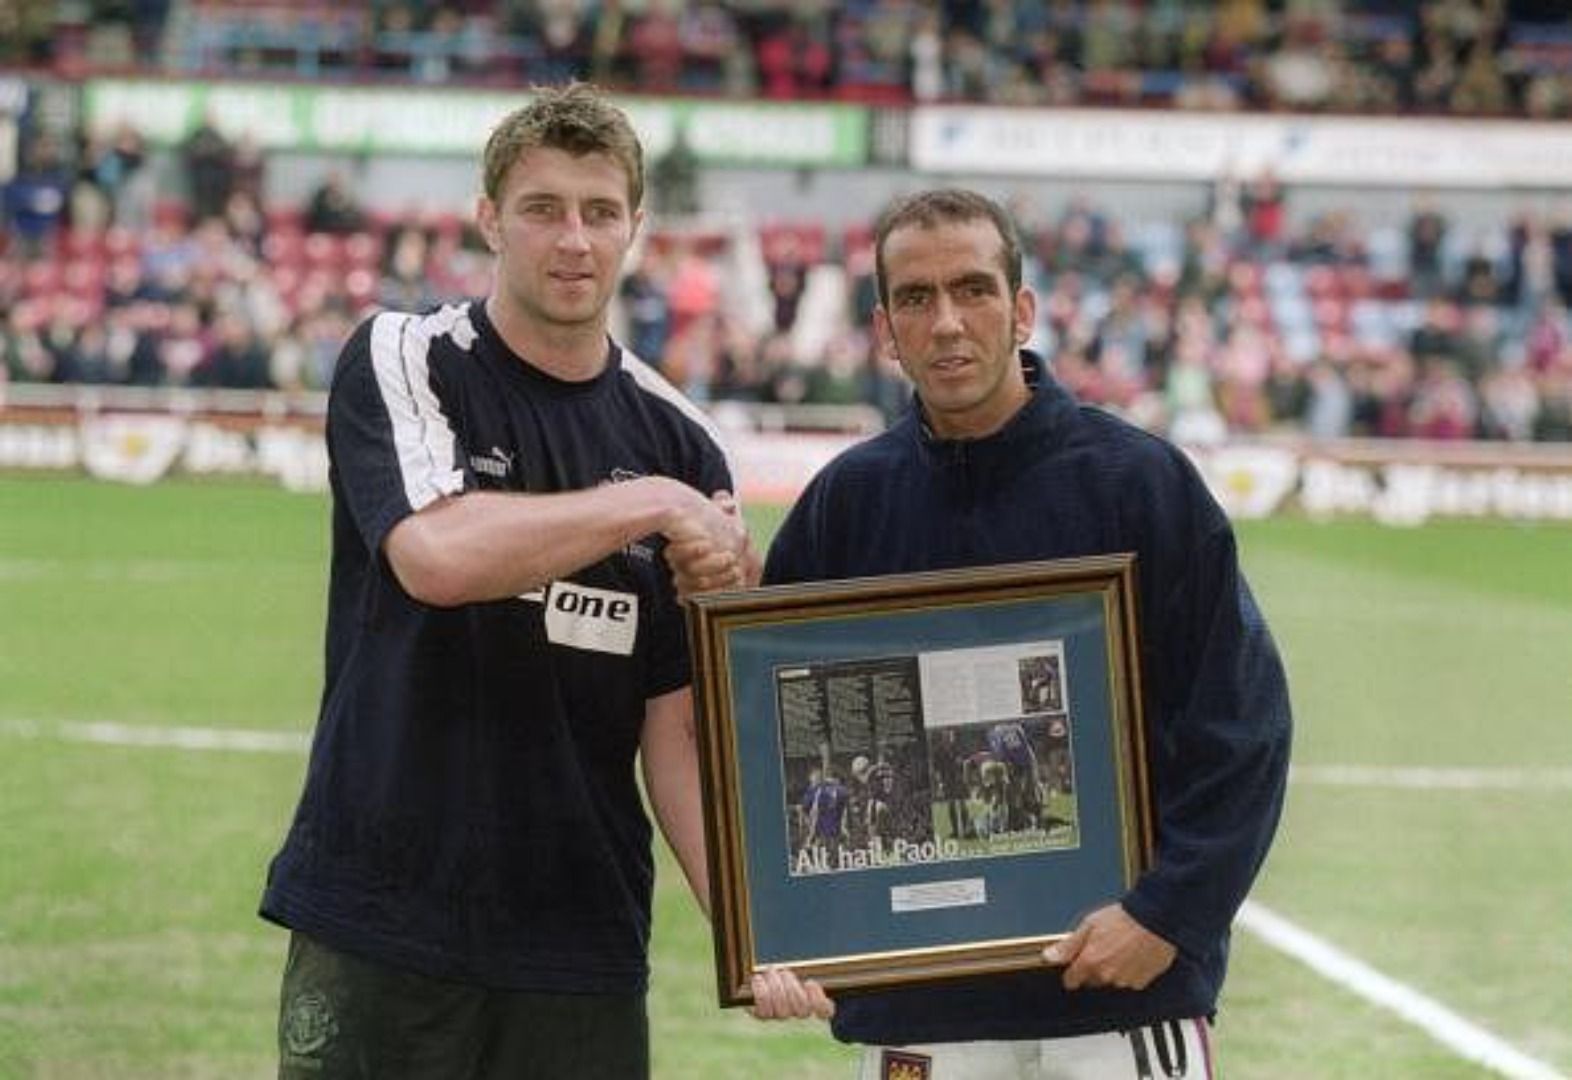 Paolo di Canio of West Ham receives an award from Everton&#039;s Paul Gerrard for his sportsmanship.